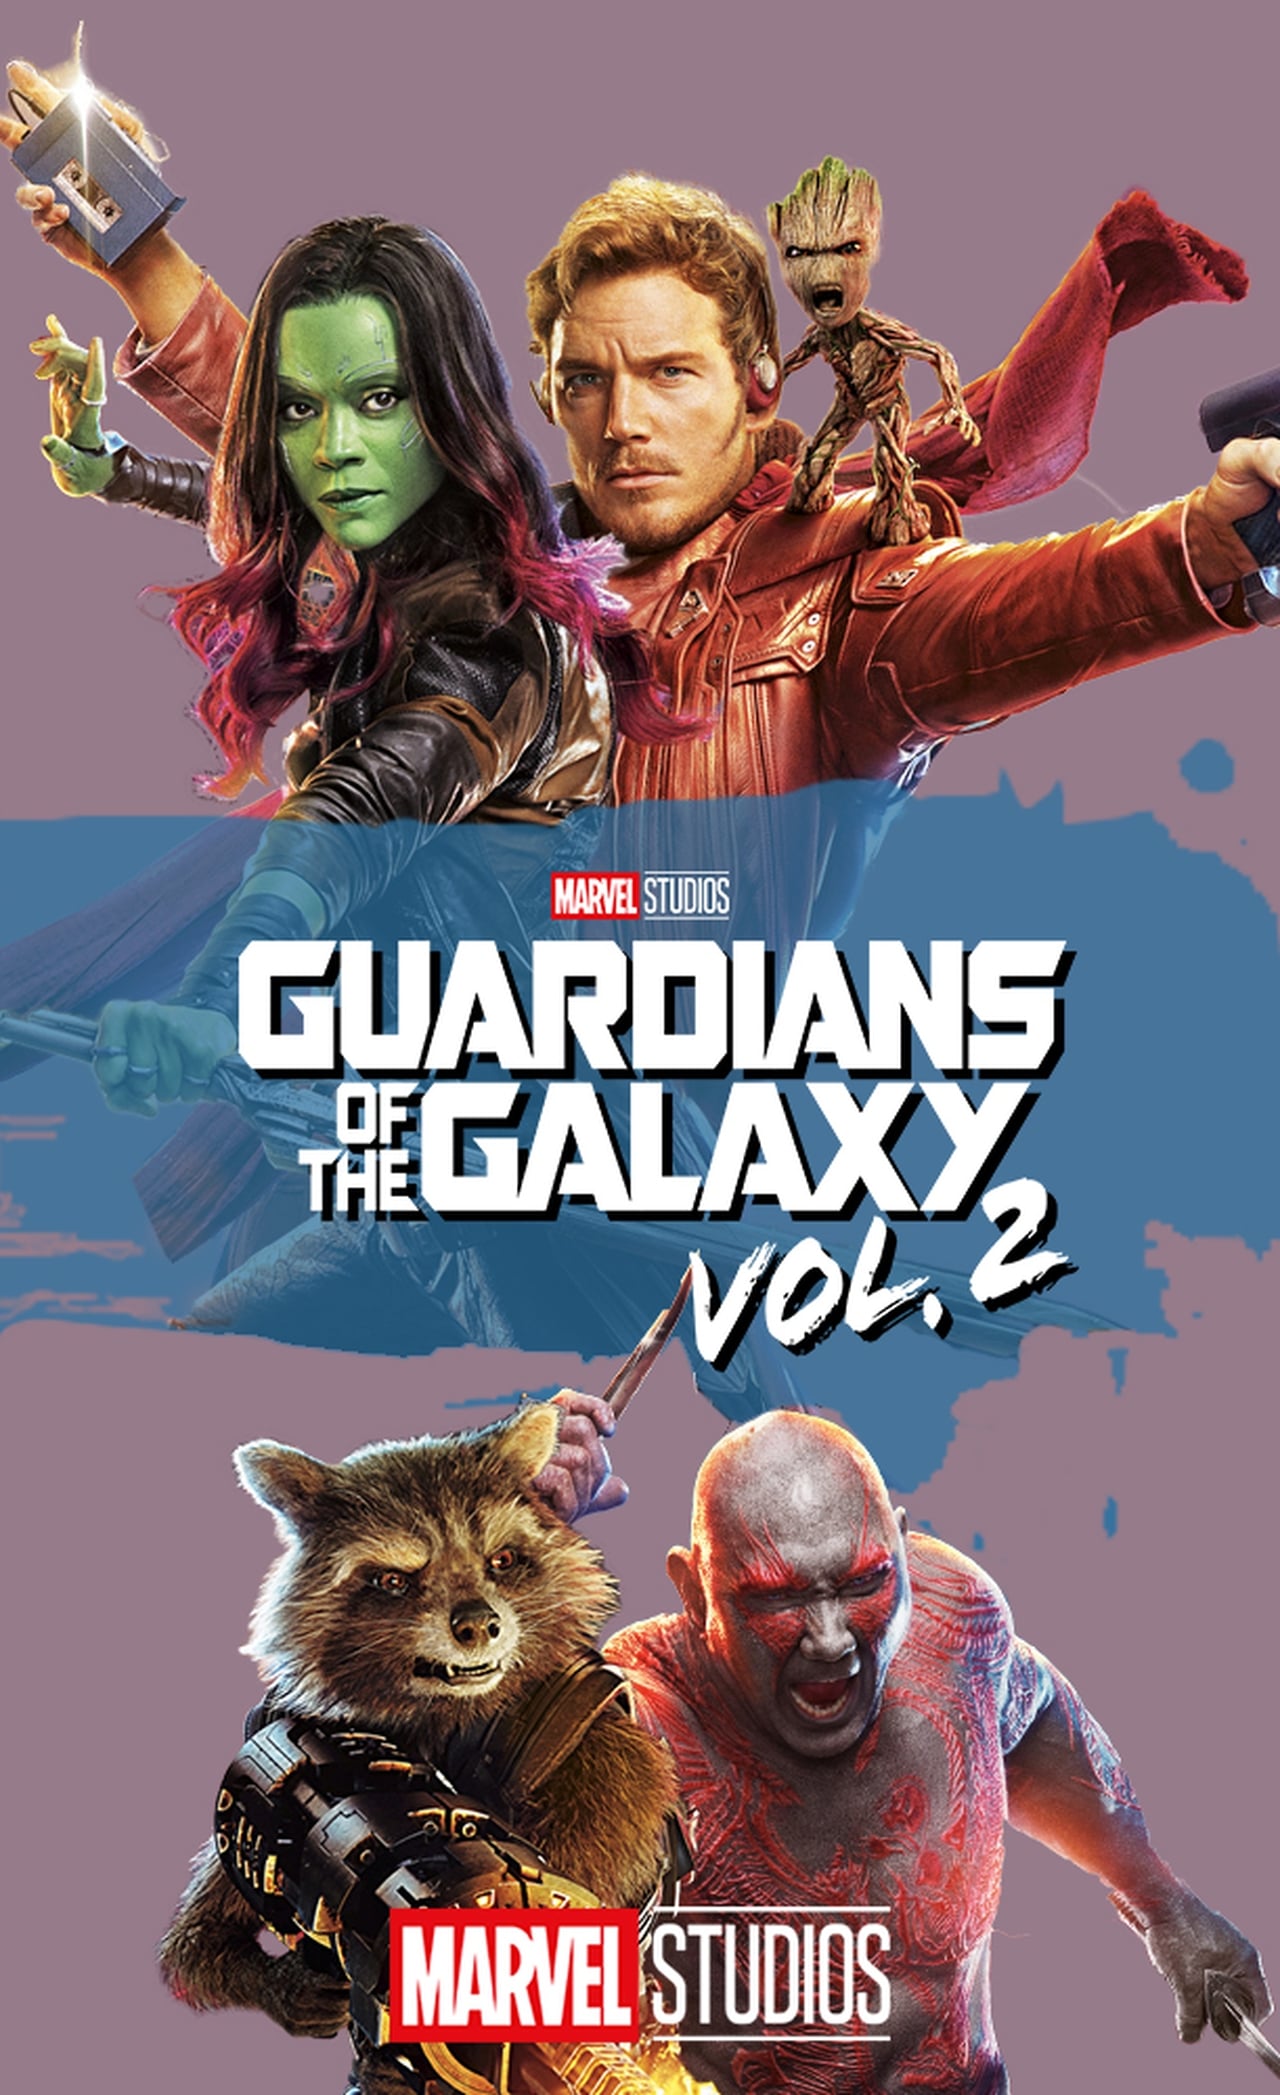 Watch Guardians of the Galaxy Vol. 2 (2017) Movies Online at play